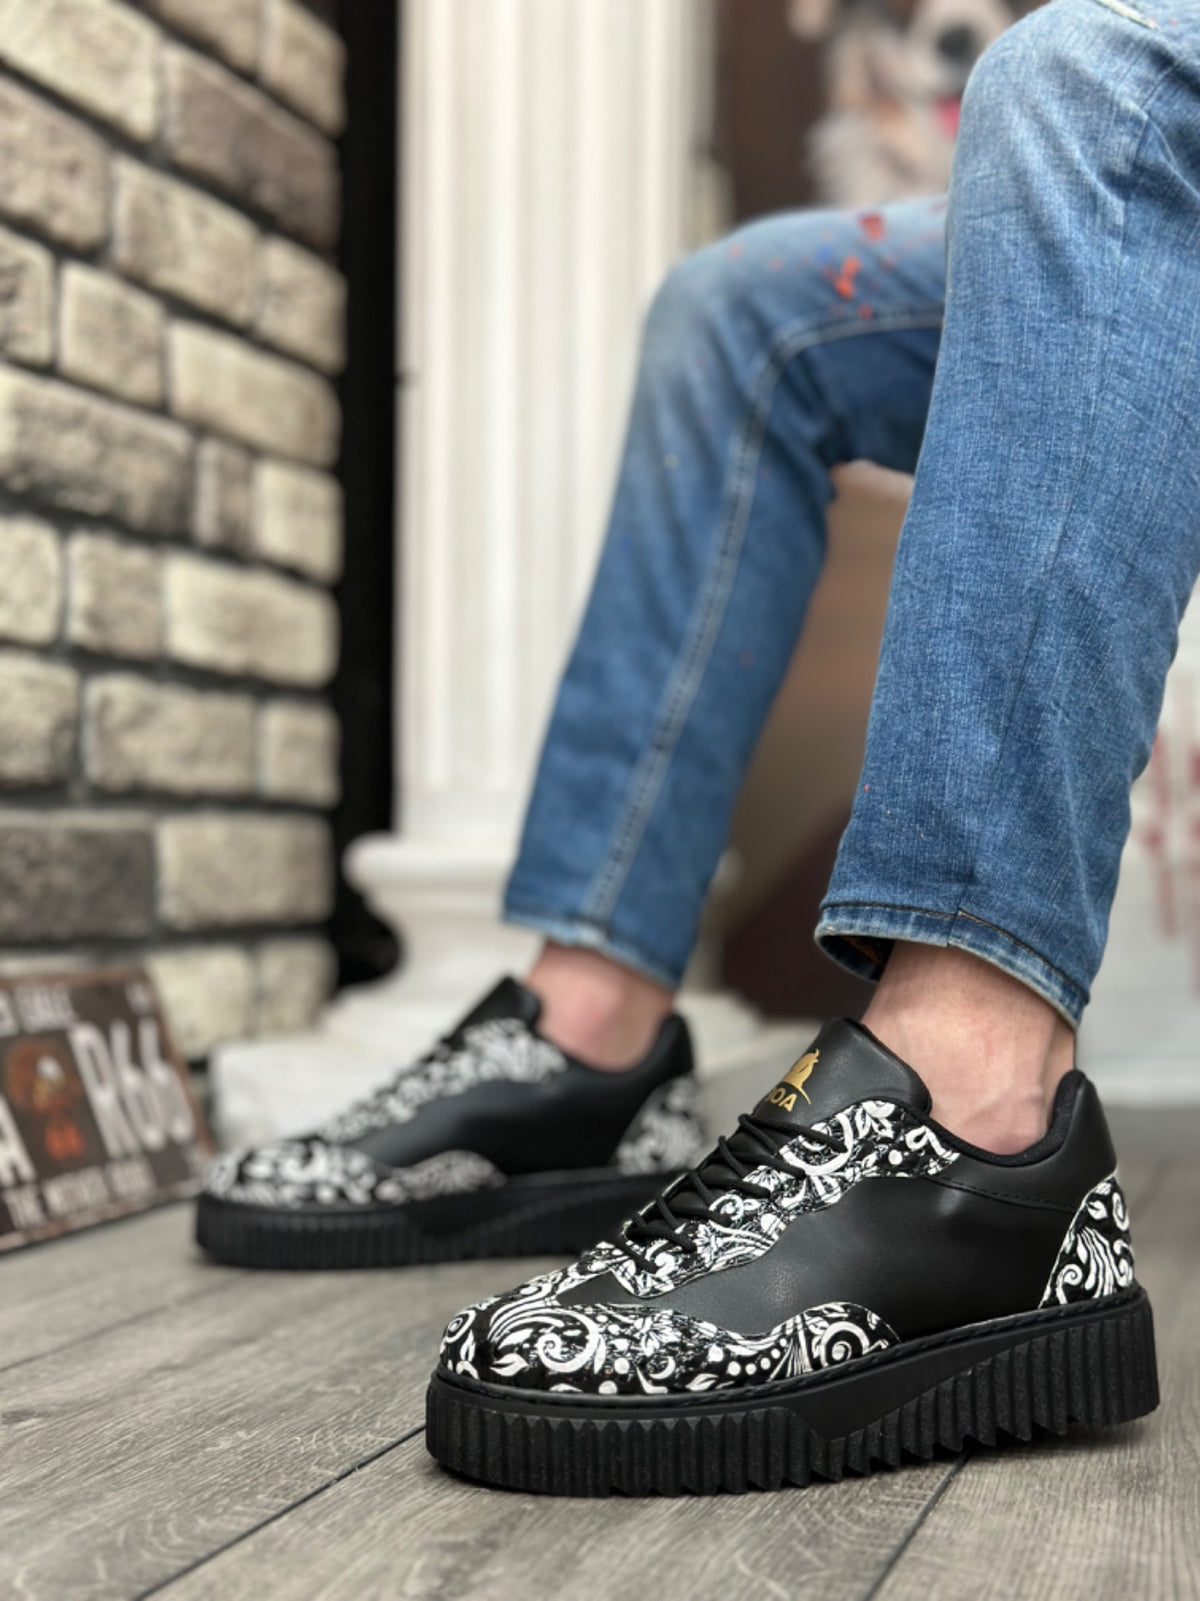 BA0802 Gothic Patterned Black High Sole Men's Casual Shoes - STREETMODE™